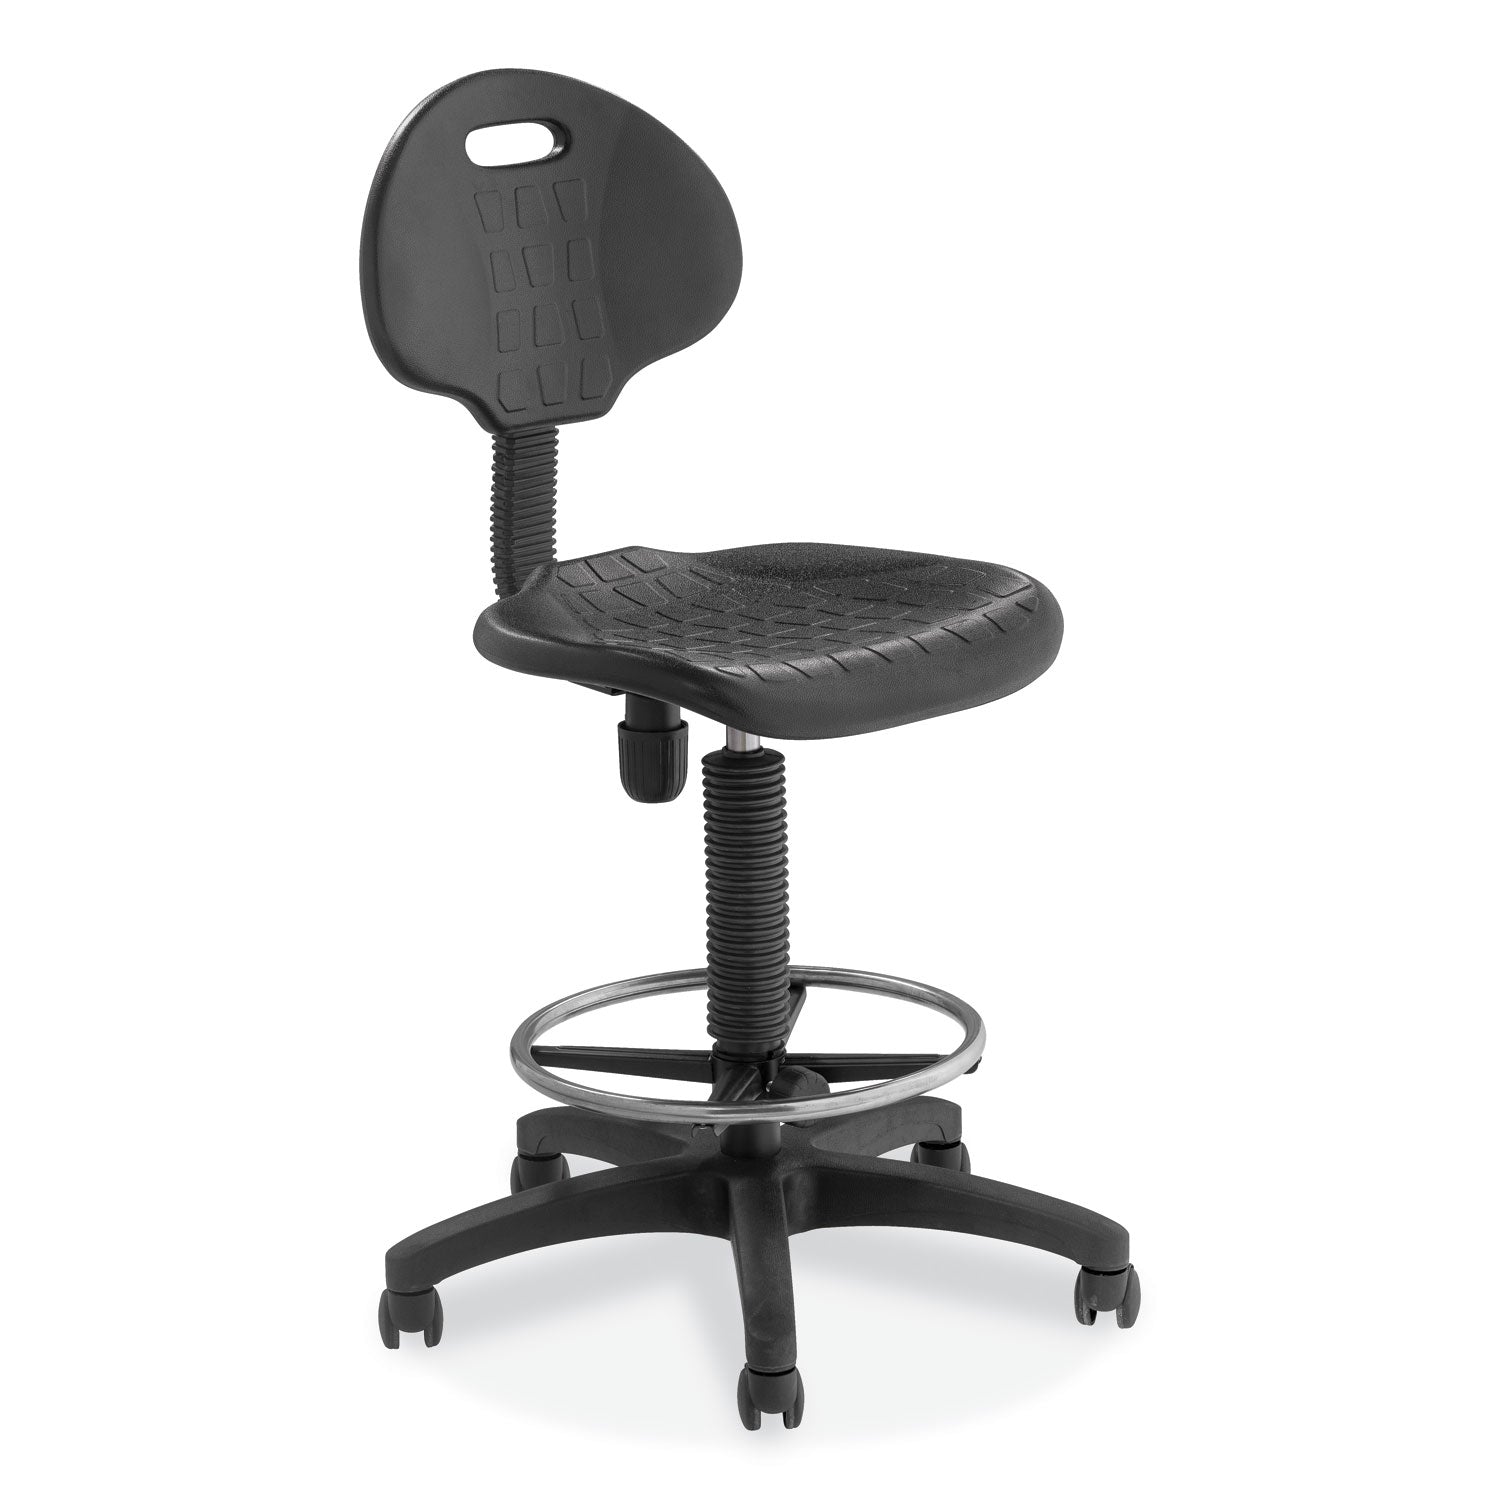 6700-series-polyurethane-adj-height-task-chair-supports-300-lb-22-32-seat-ht-black-seat-back-base-ships-in-1-3-bus-days_nps6722hb - 1